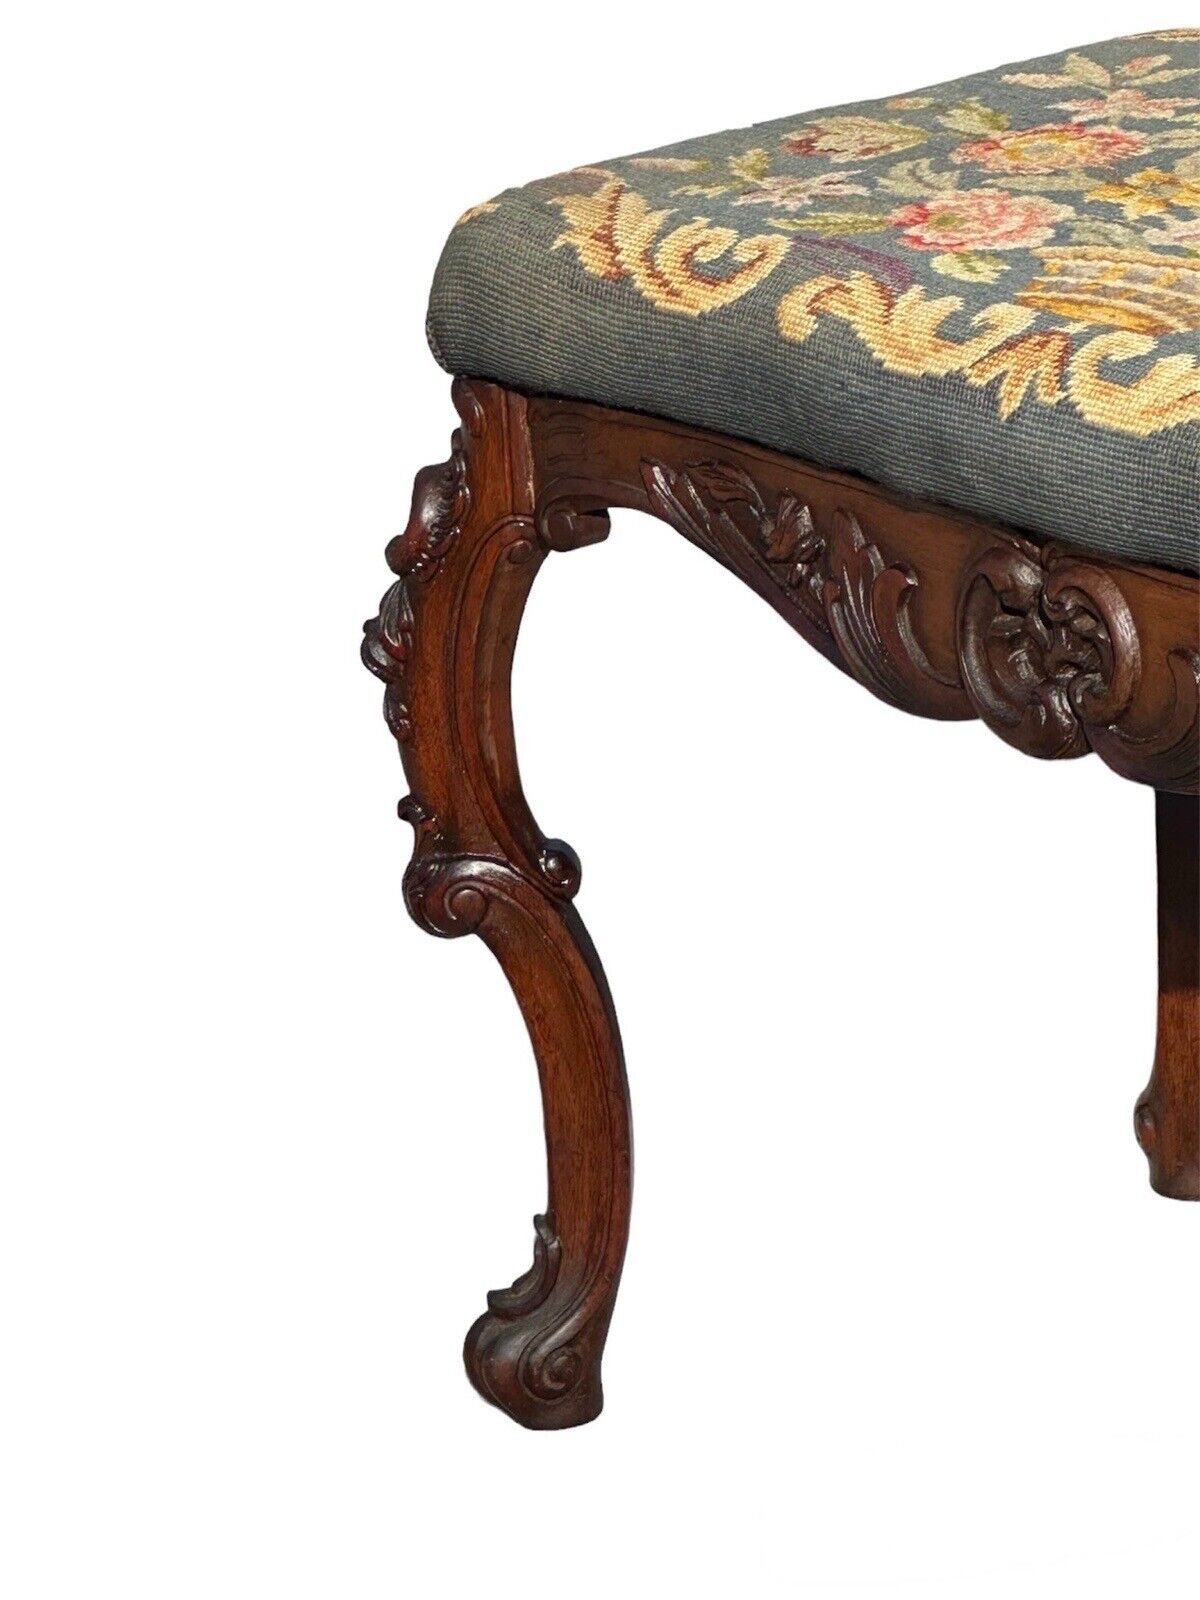 Antique French Louis XV Style Walnut Vanity Bench With Needlepoint Floral Basket